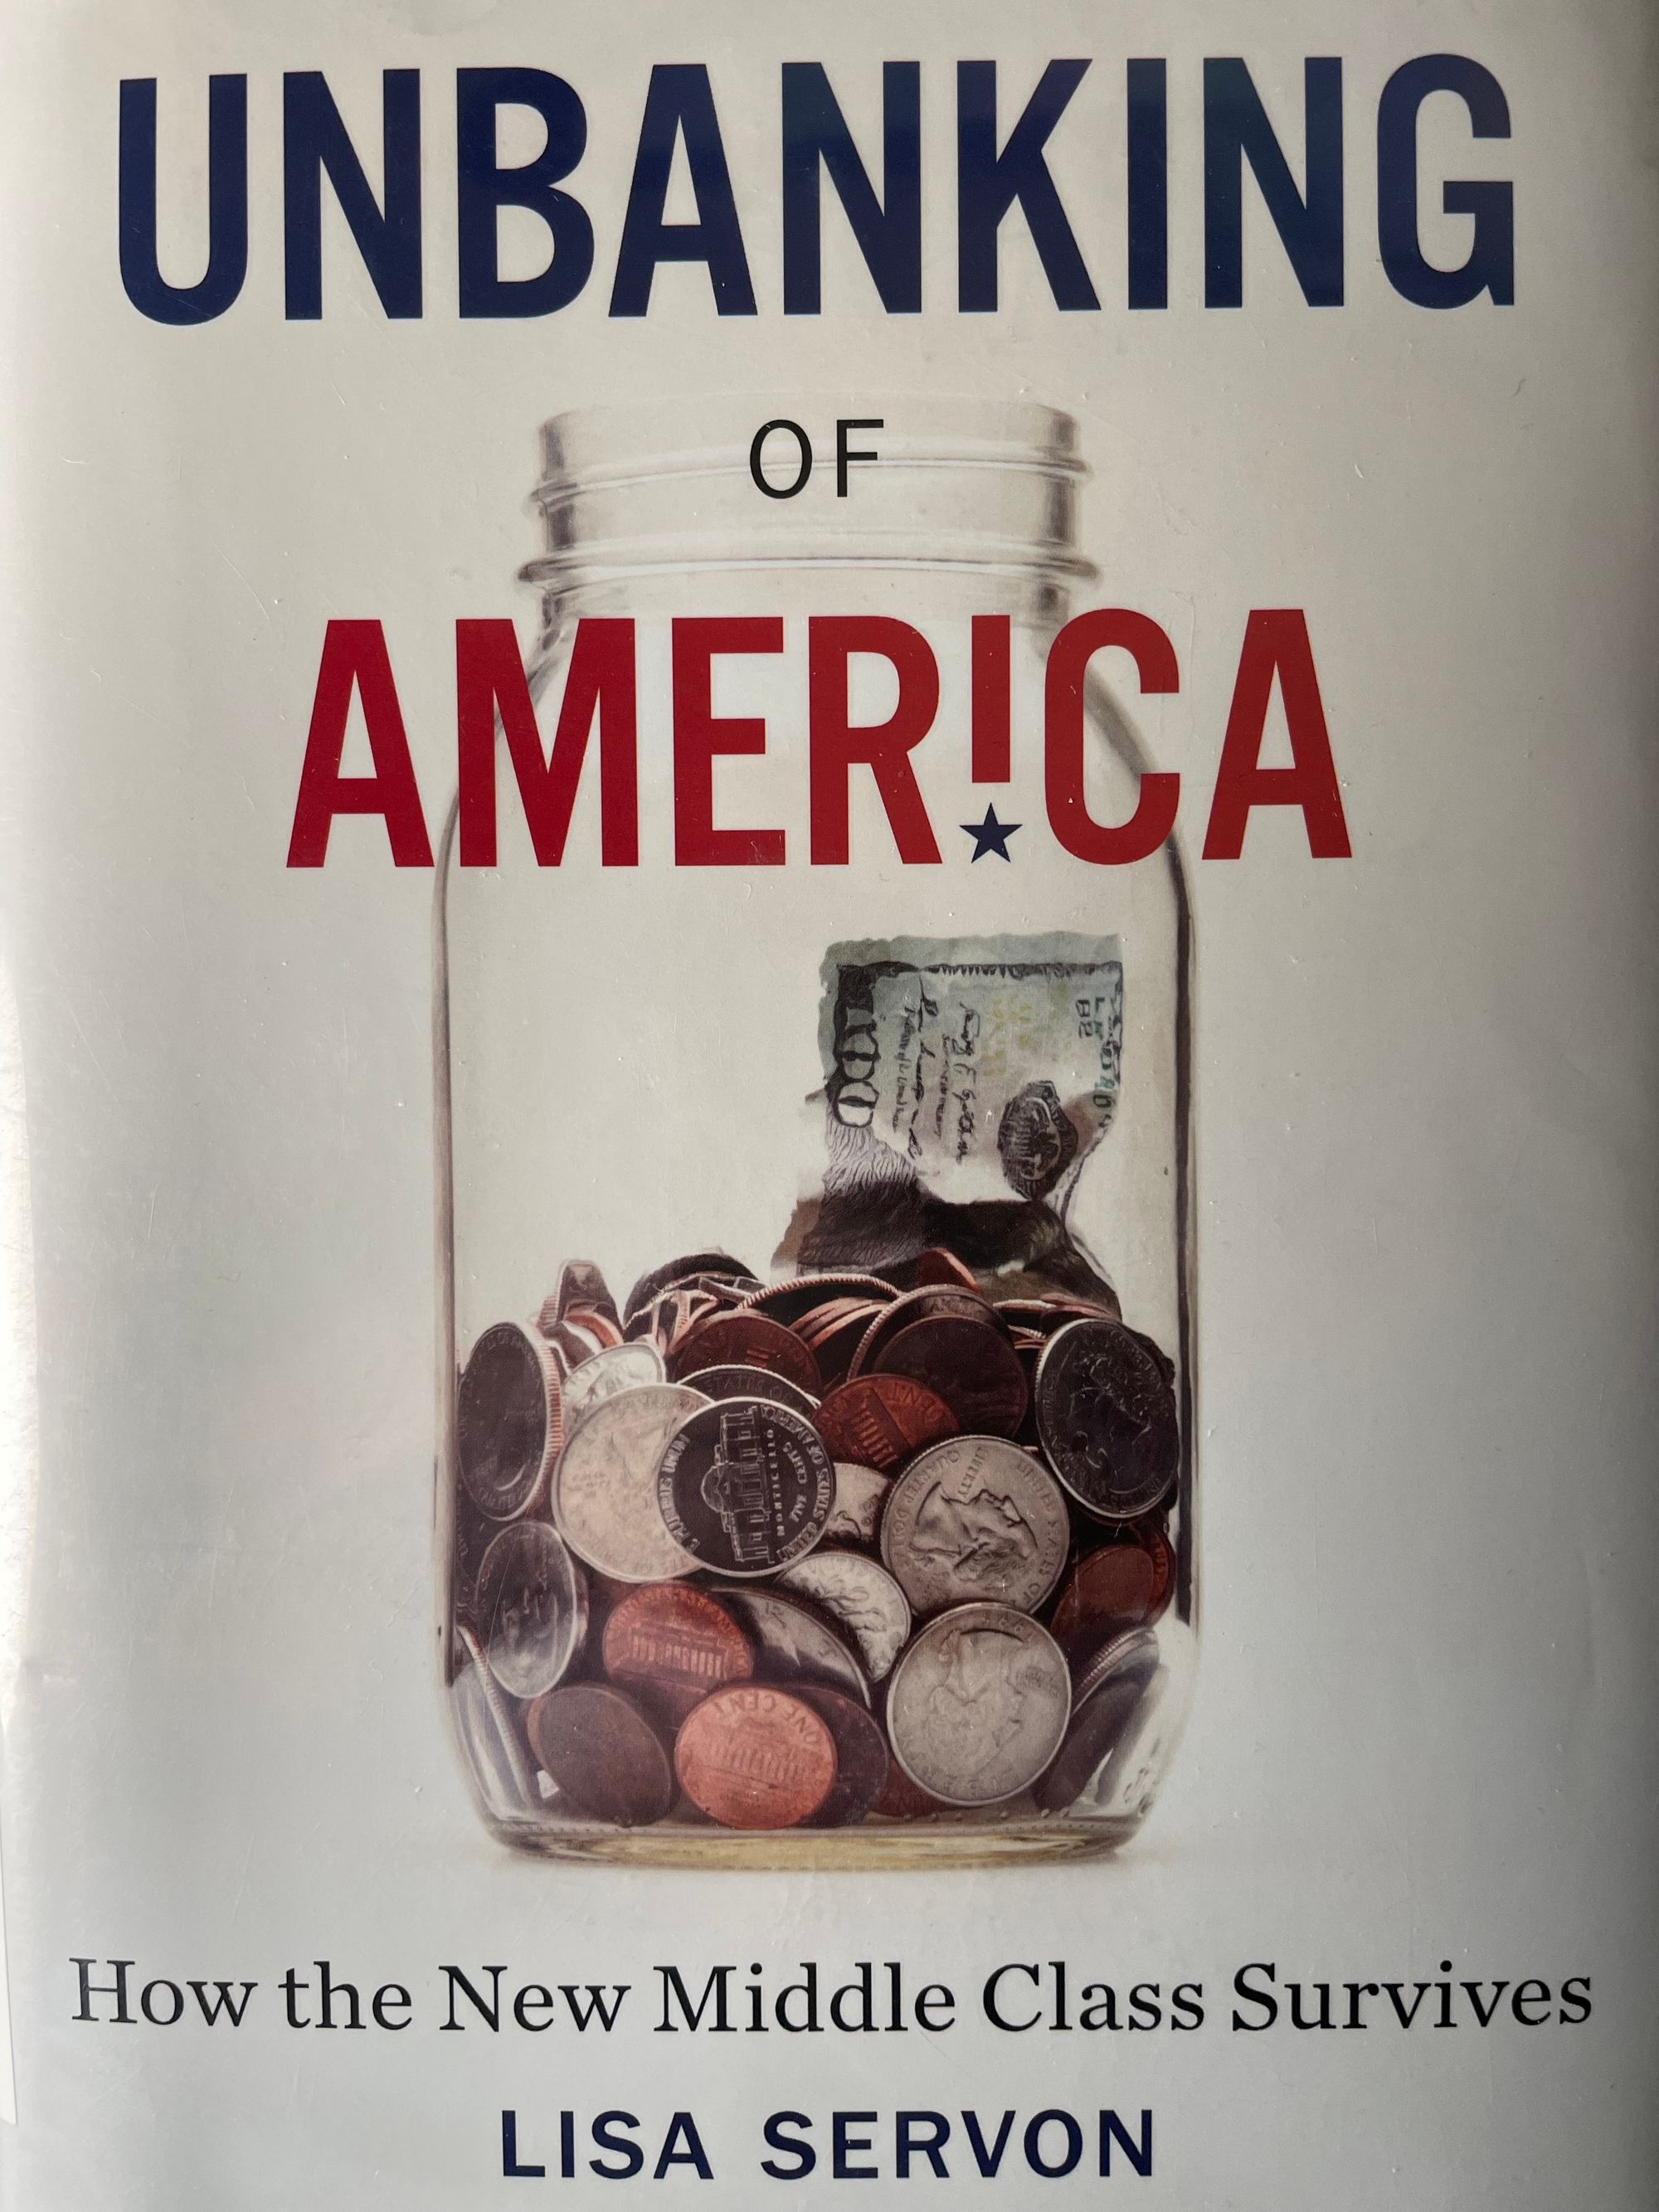 The Unbanking of America - Book Review